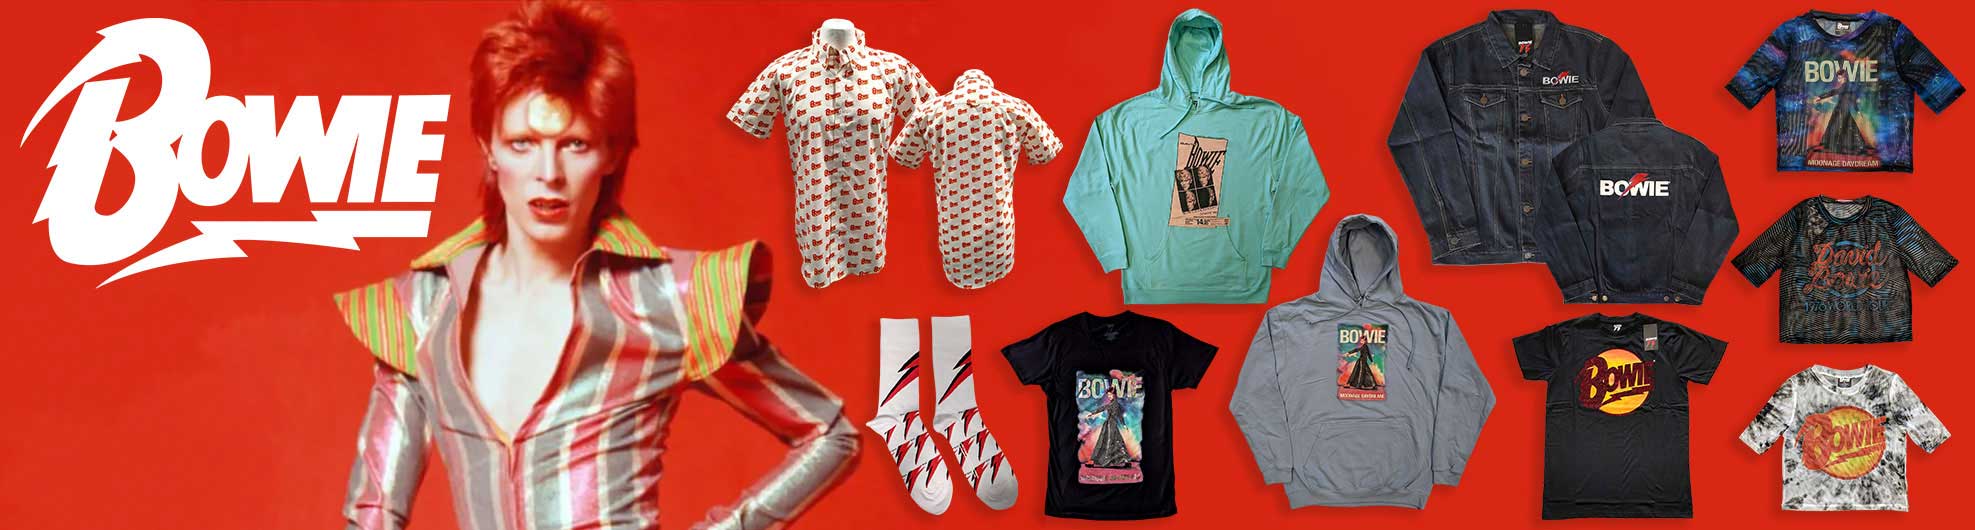 David Bowie official licensed t-shirts and music merch 